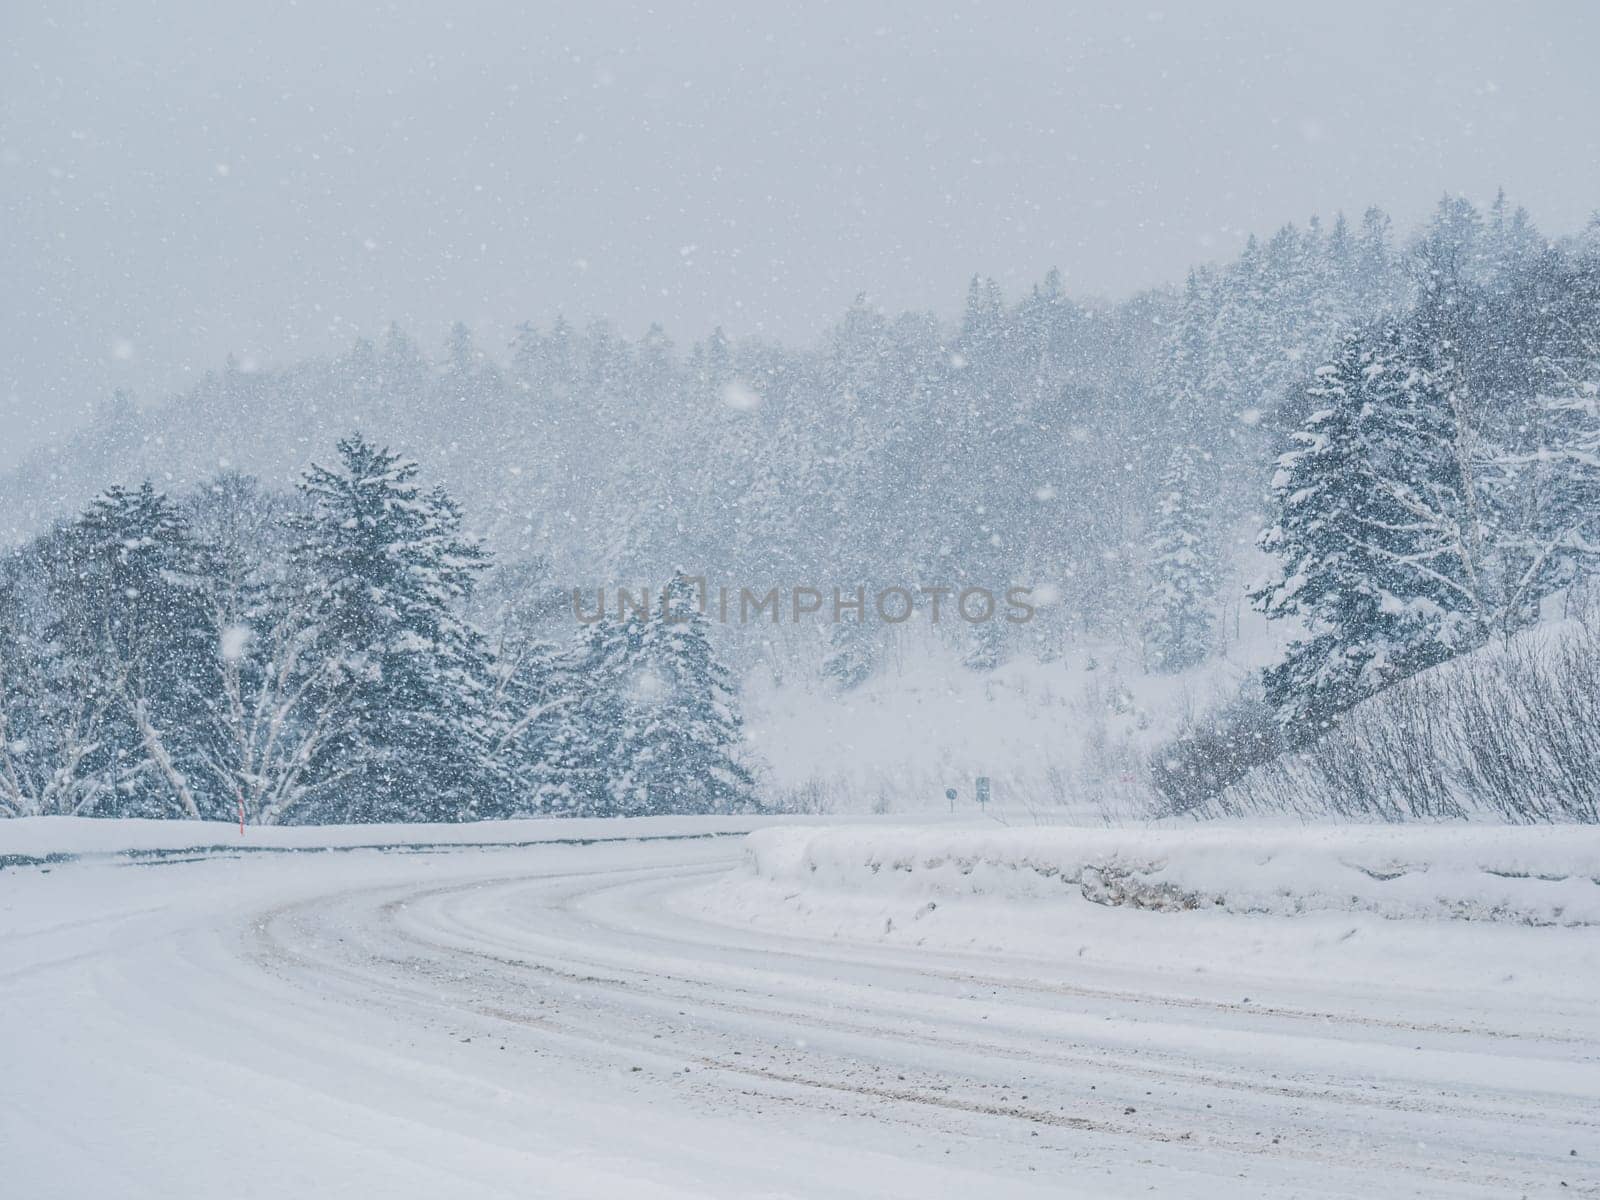 Winter snowstorm on a mountain road with dense forest in broad daylight by Busker